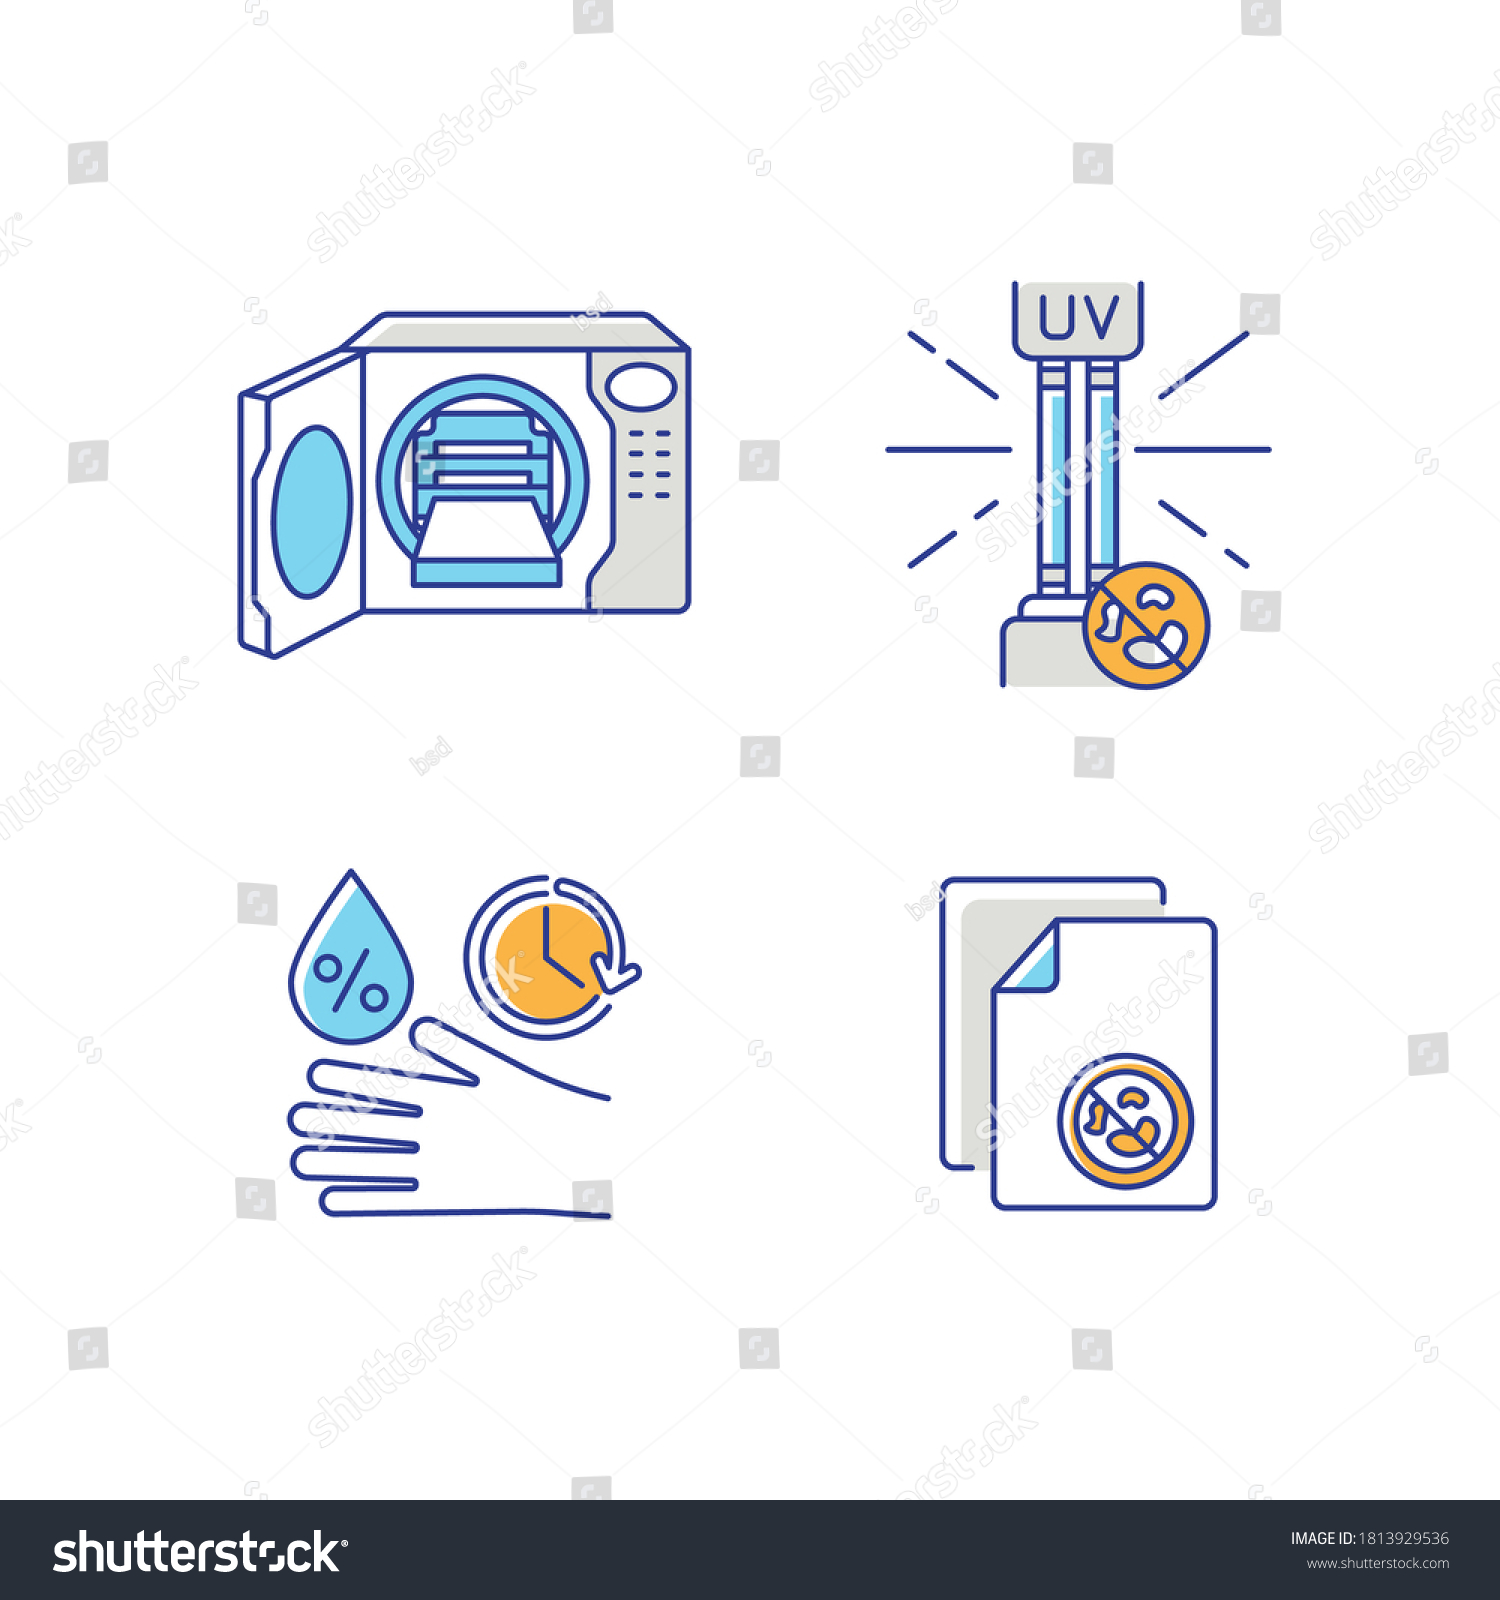 SVG of Disinfection equipment RGB color icons set. UV lamp, autoclave and antibacterial wipes. Sanitation tools, professional disinfectants. Isolated vector illustrations svg